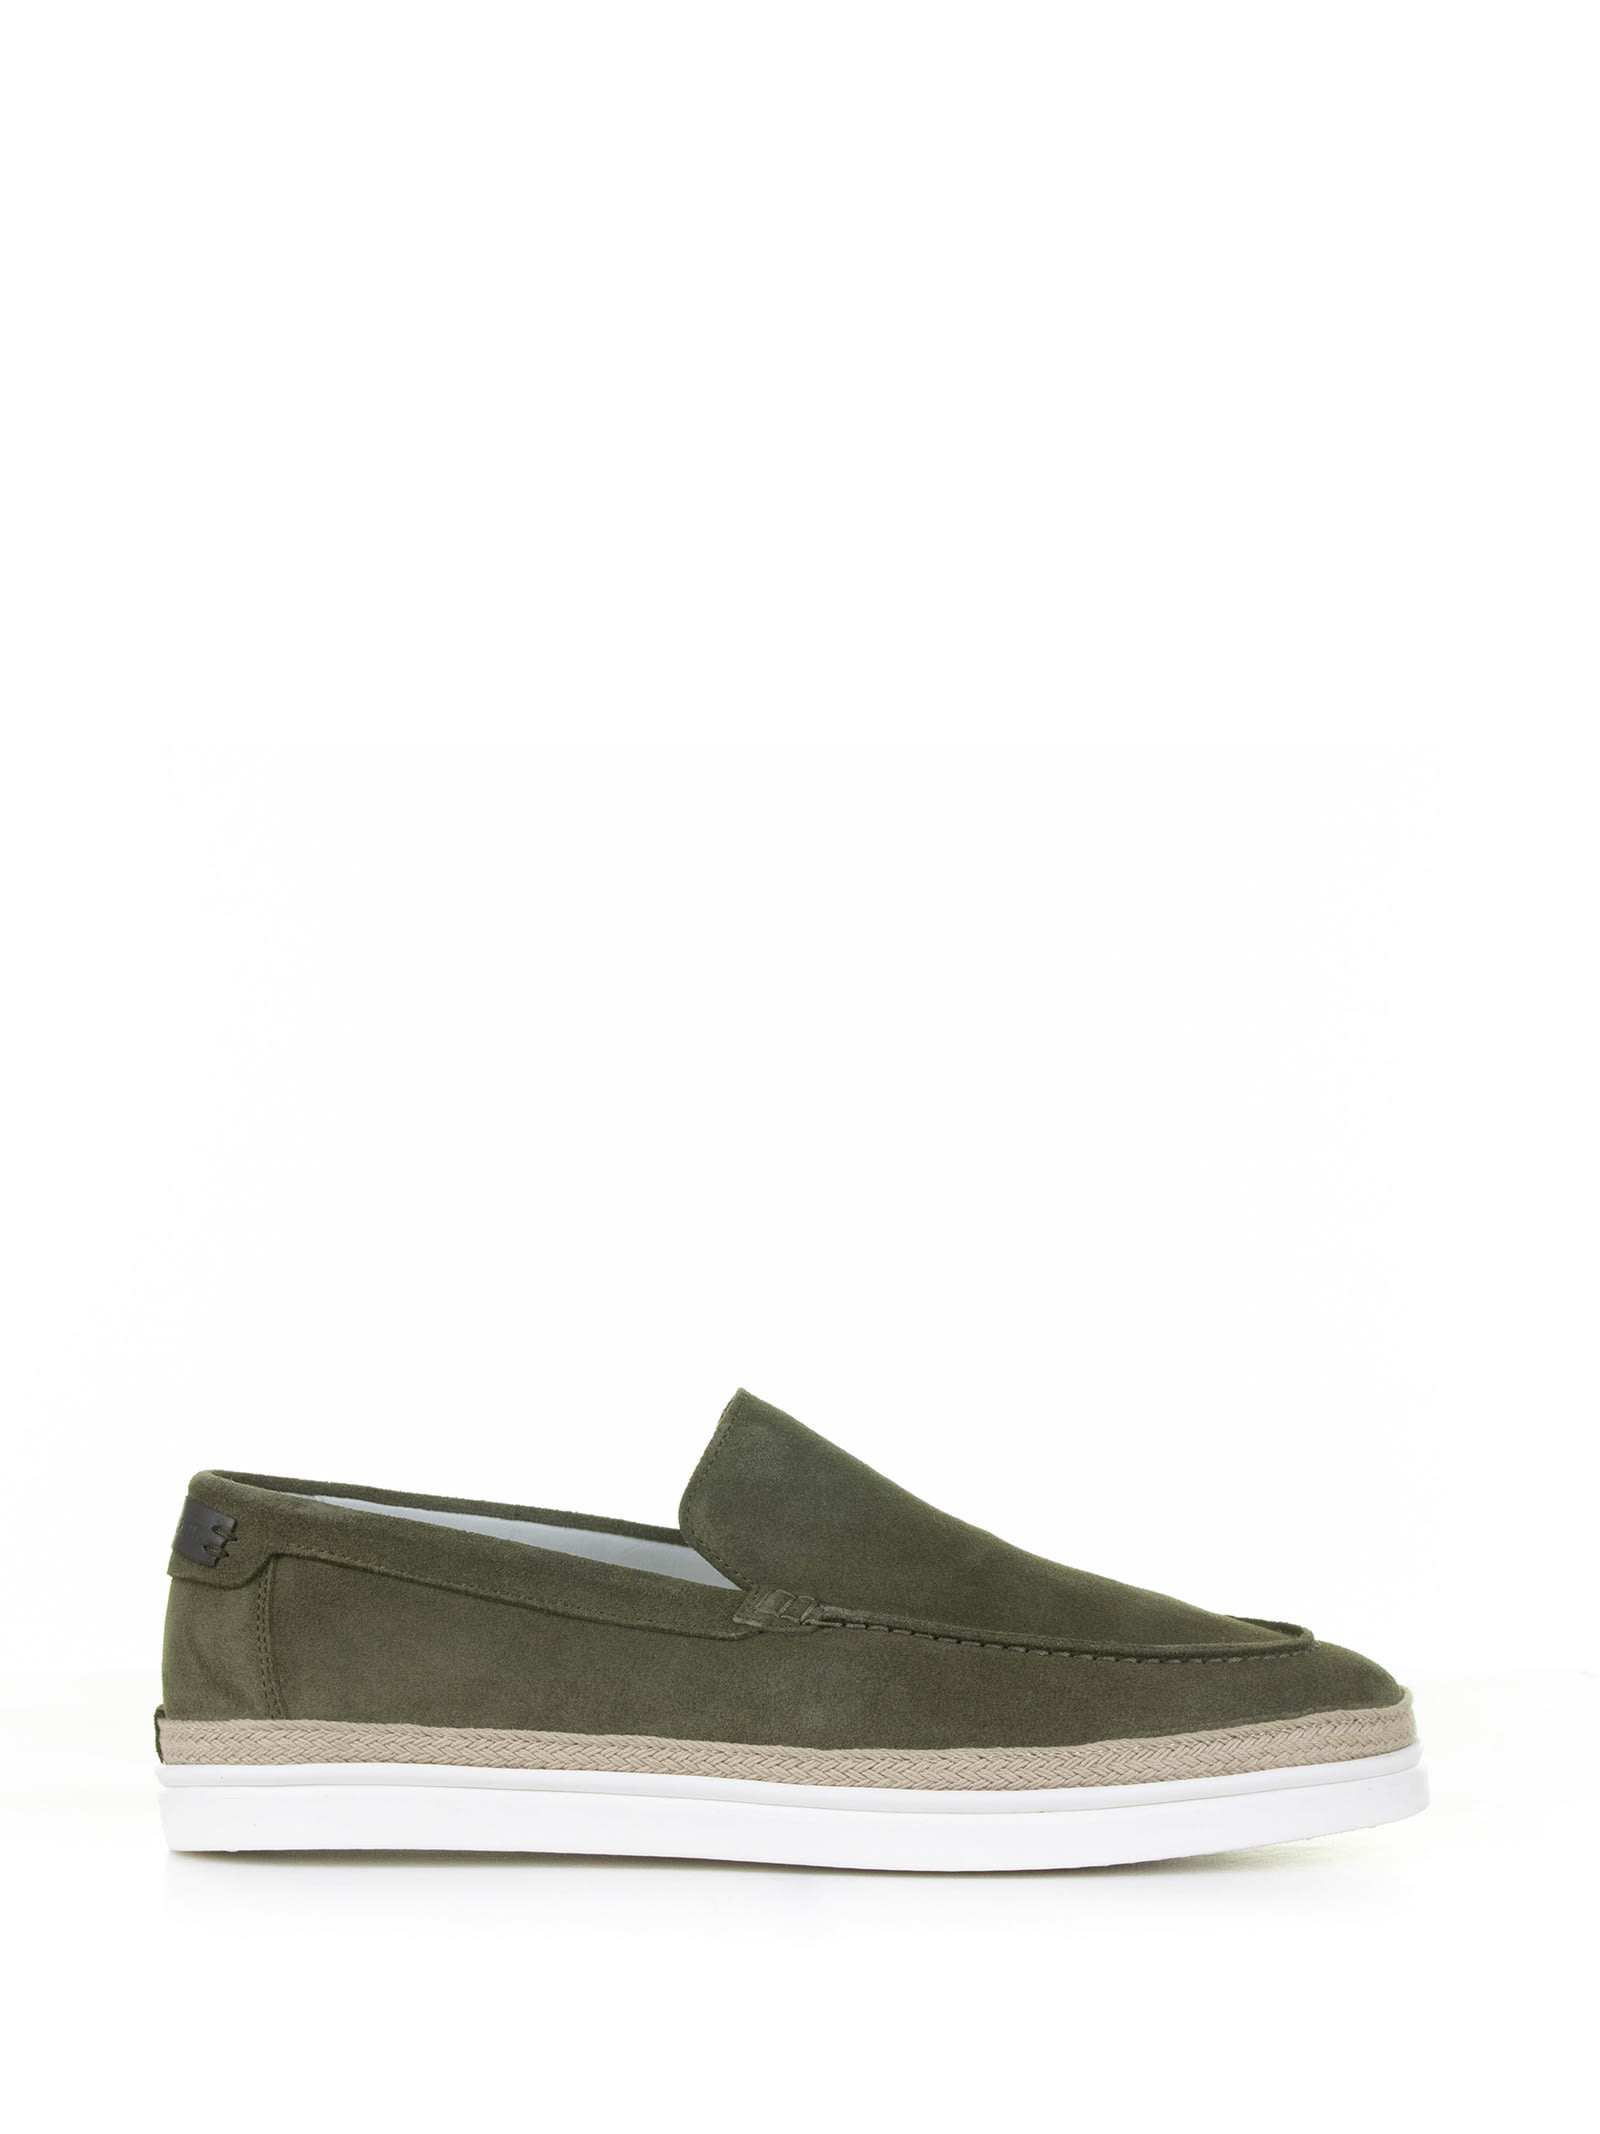 Green Suede Moccasin